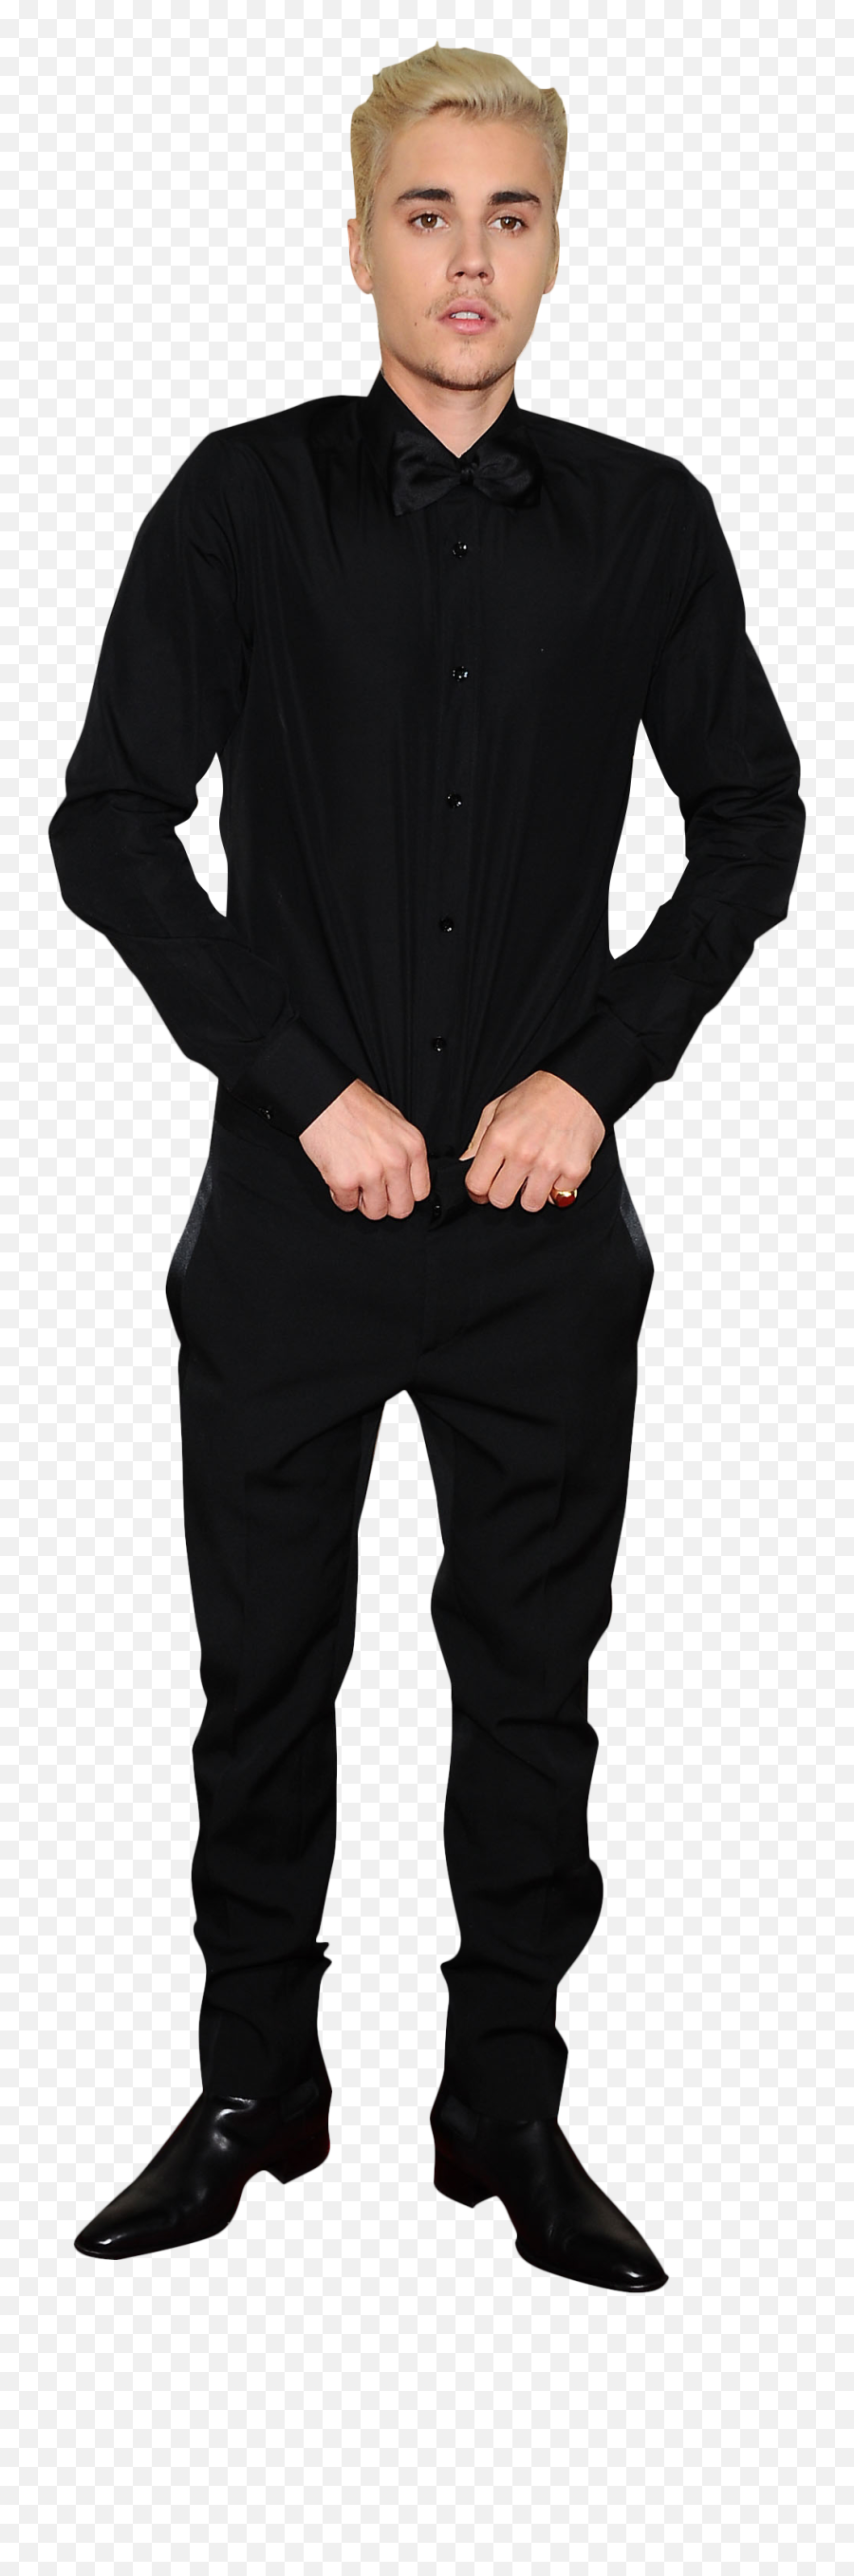 Download Justin Bieber In Black Png Image For Free - Portable Network Graphics,Black Suit Png